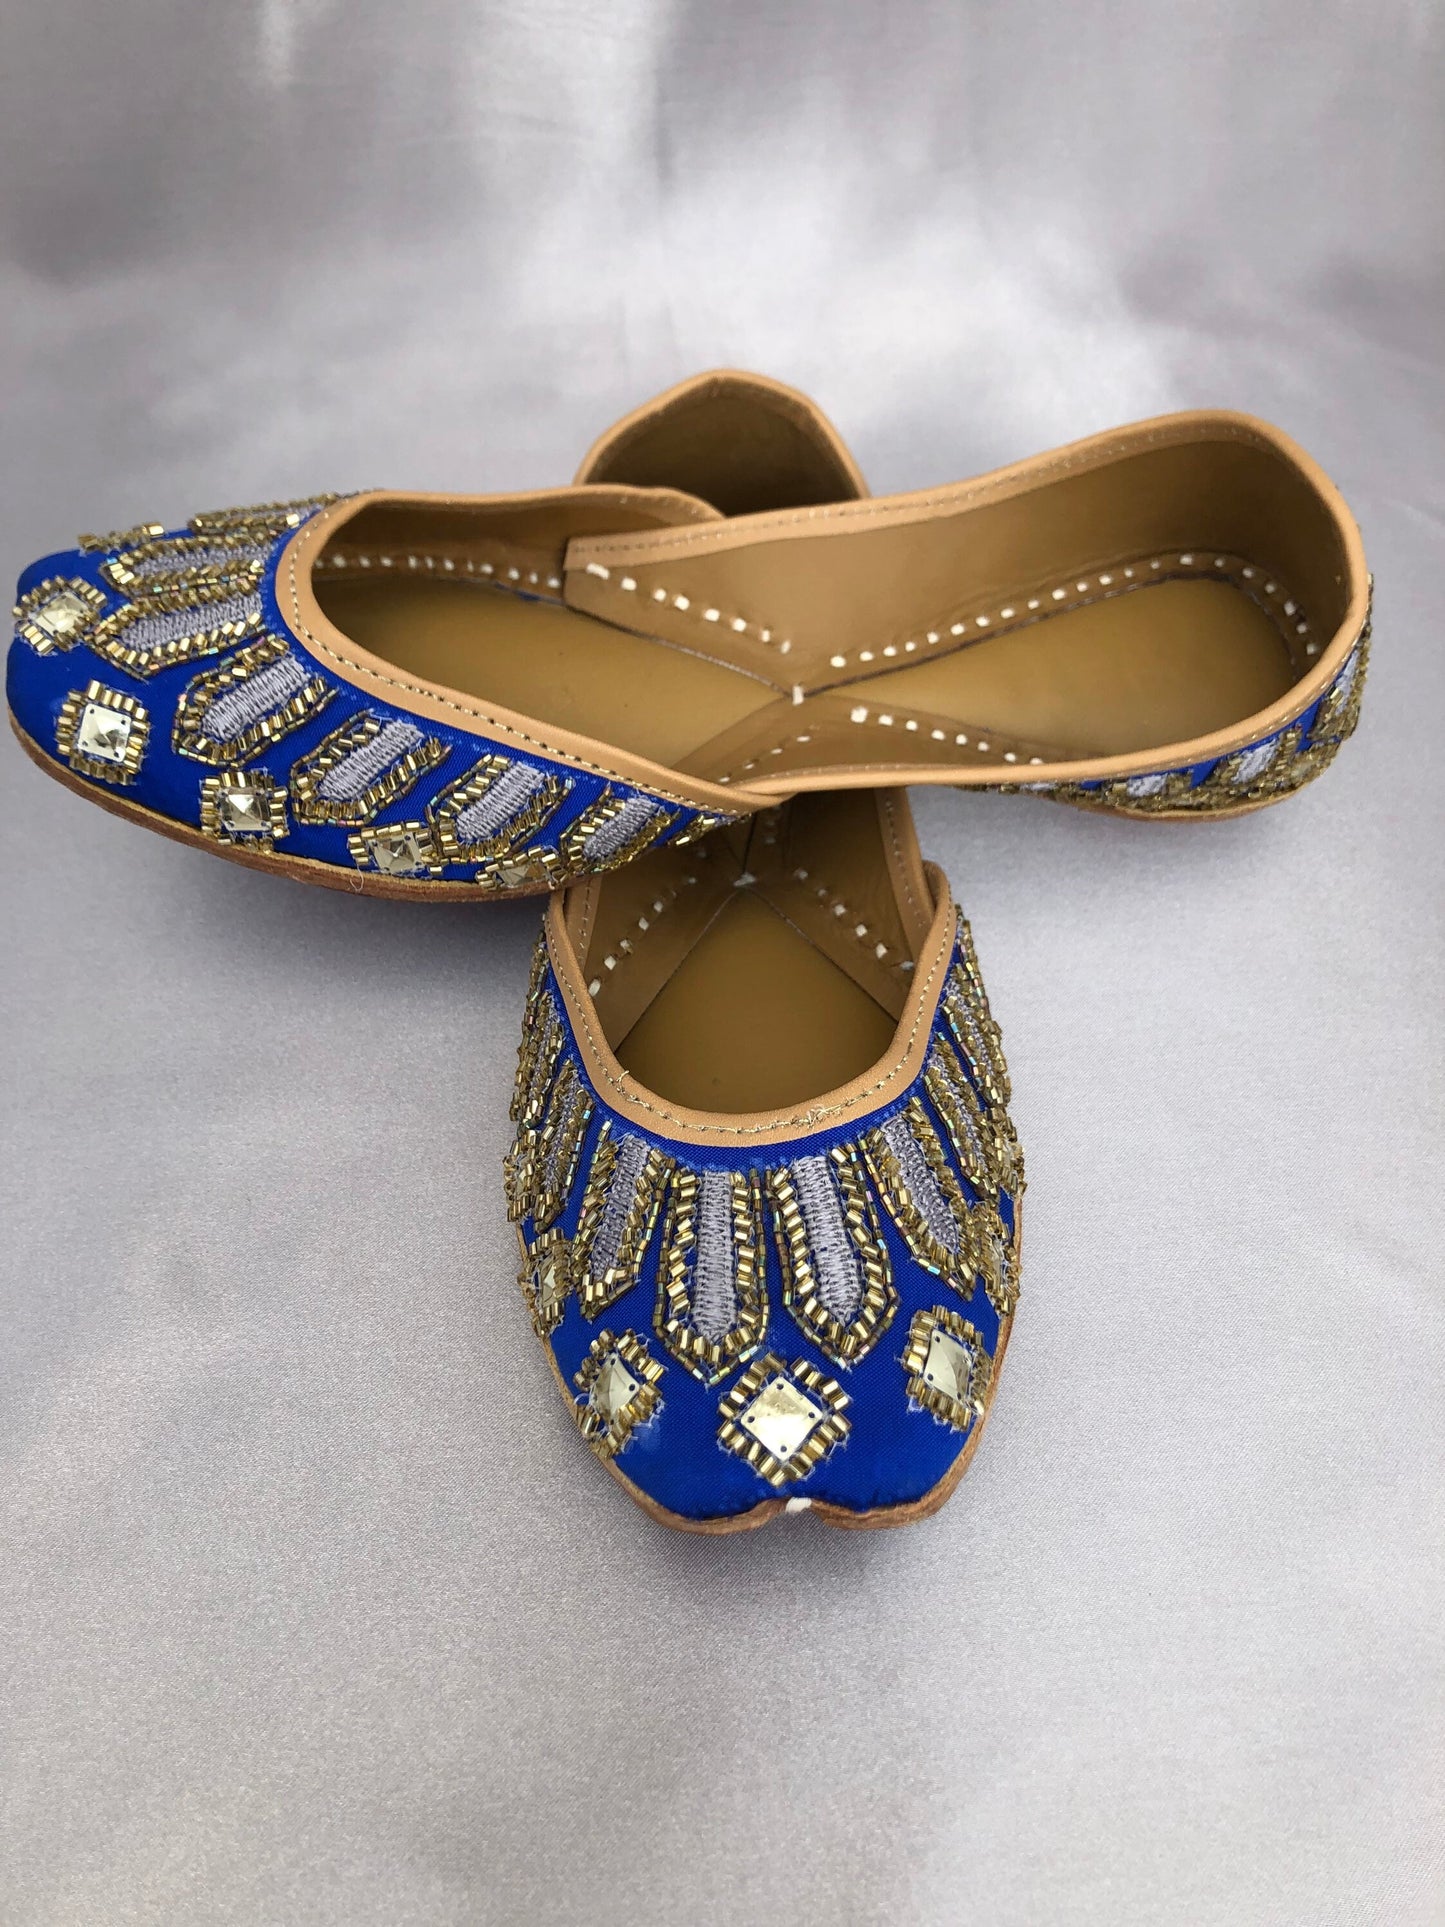 Blue Punjabi Jutti / Jooti with Pearls and Crystals Bride’s Wedding Shoes Various Sizes Available US 6/7/8. UK 4/5/6